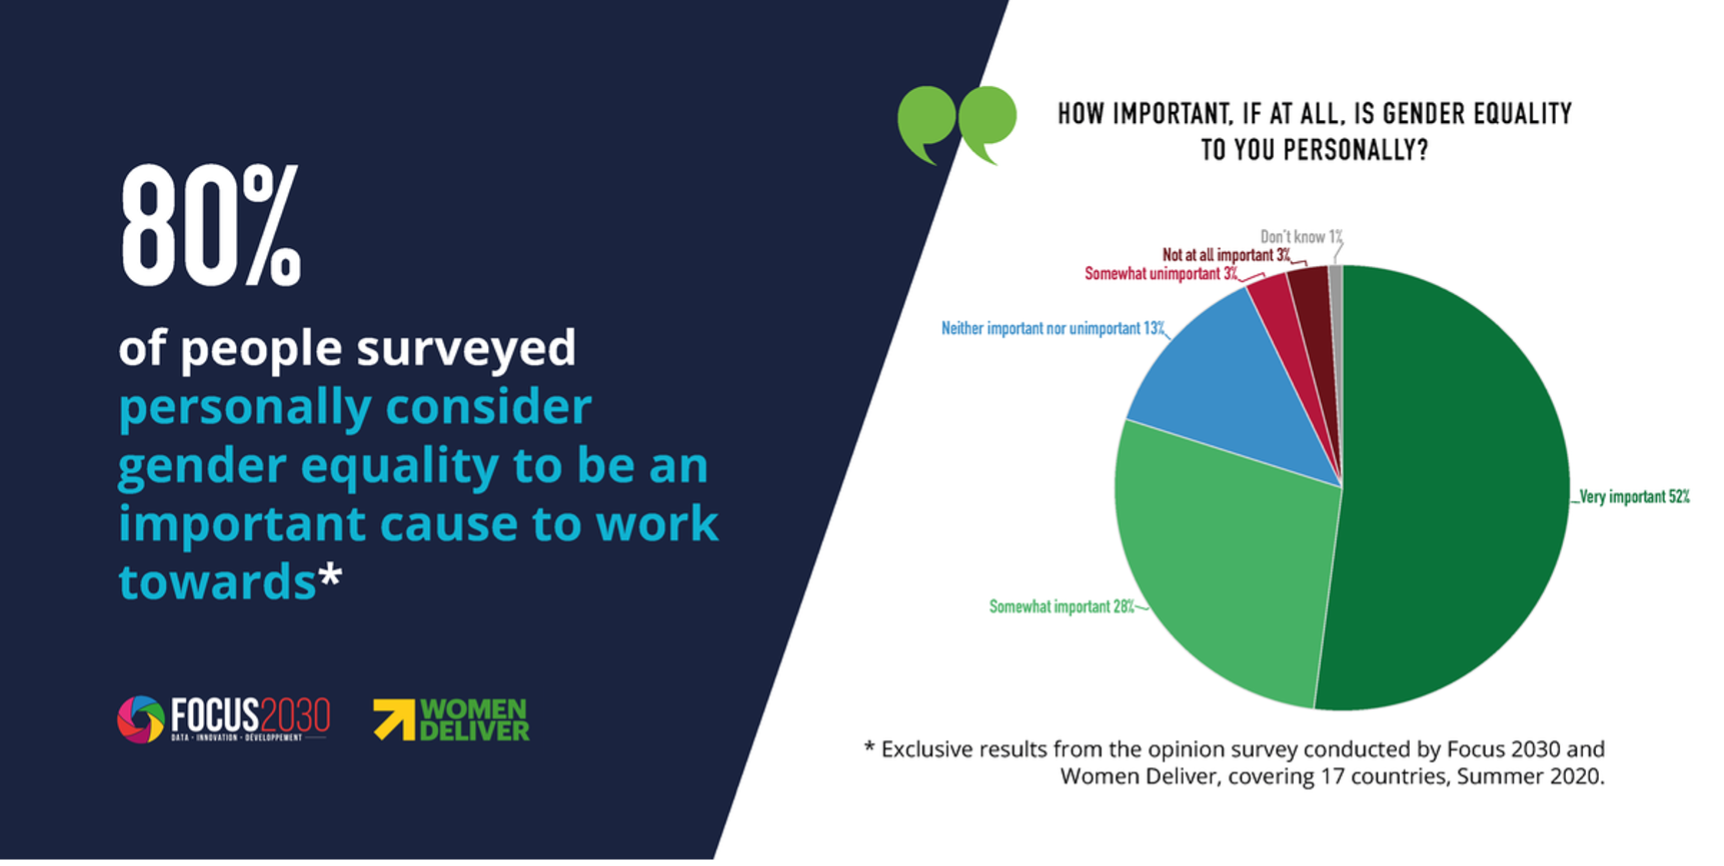 Graph showing 80% of people surveyed personally consider gender equality to be an important cause to work towards